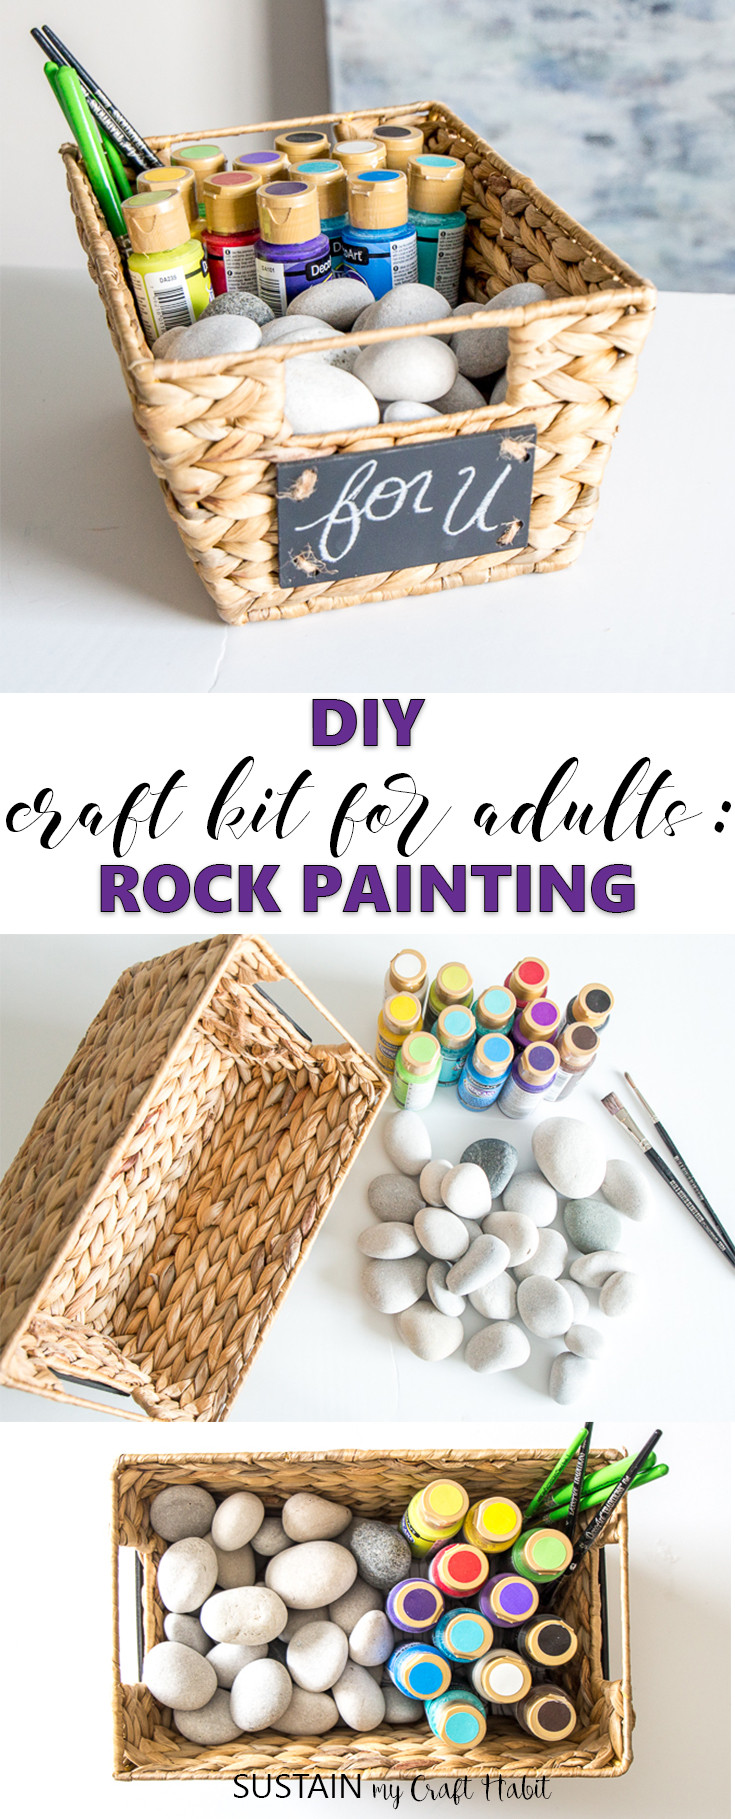 DIY Kits For Adults
 Make your Own Craft Kit for Adults Rock Painting